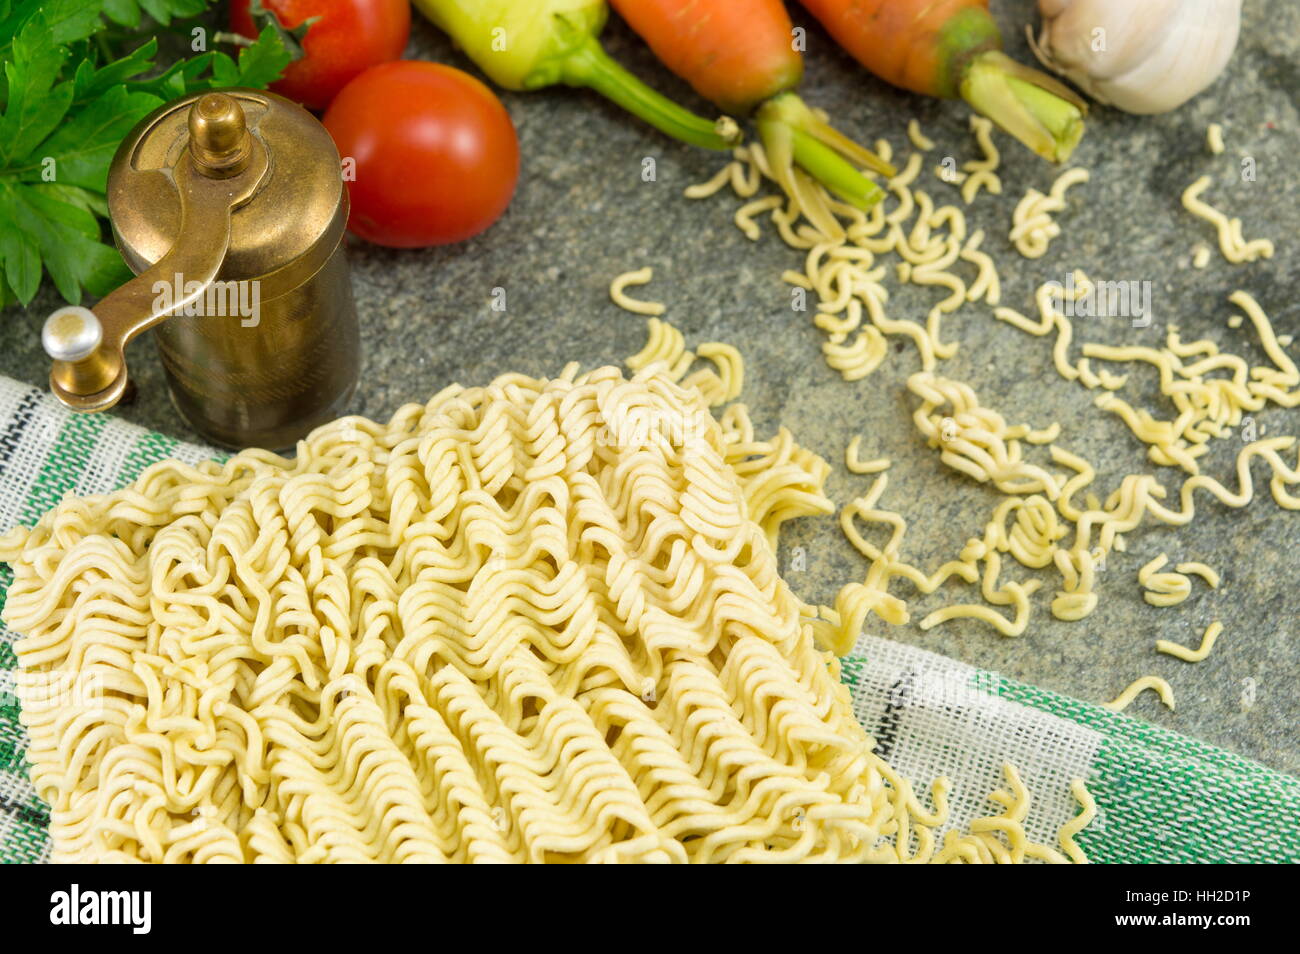 square of uncooked noodles with carrots and parsley Stock Photo